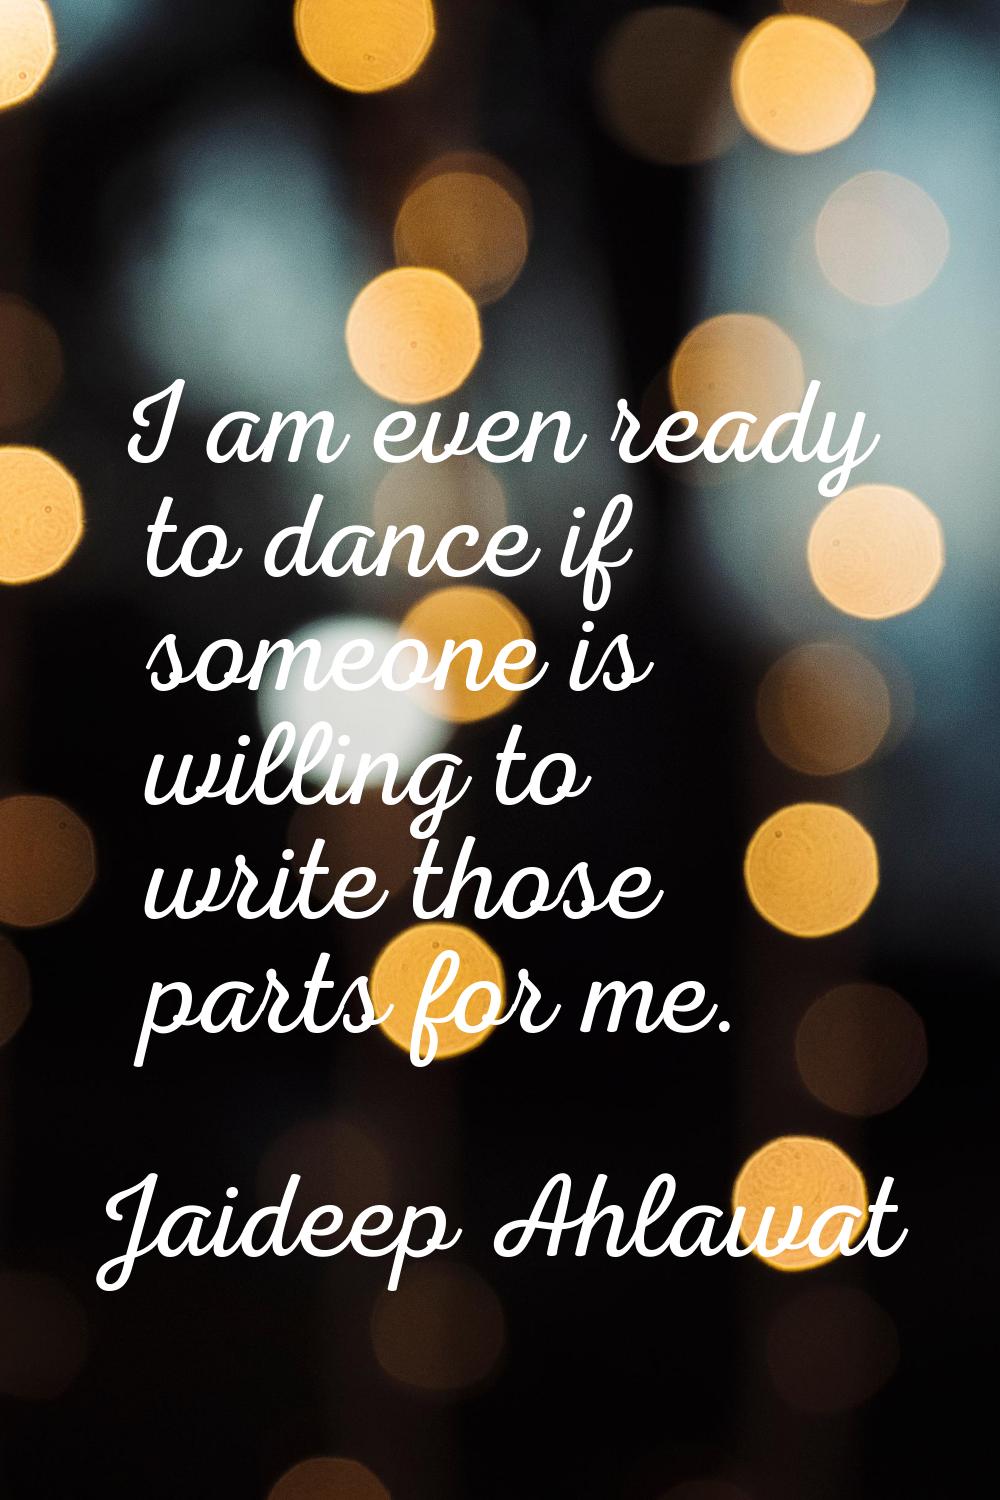 I am even ready to dance if someone is willing to write those parts for me.